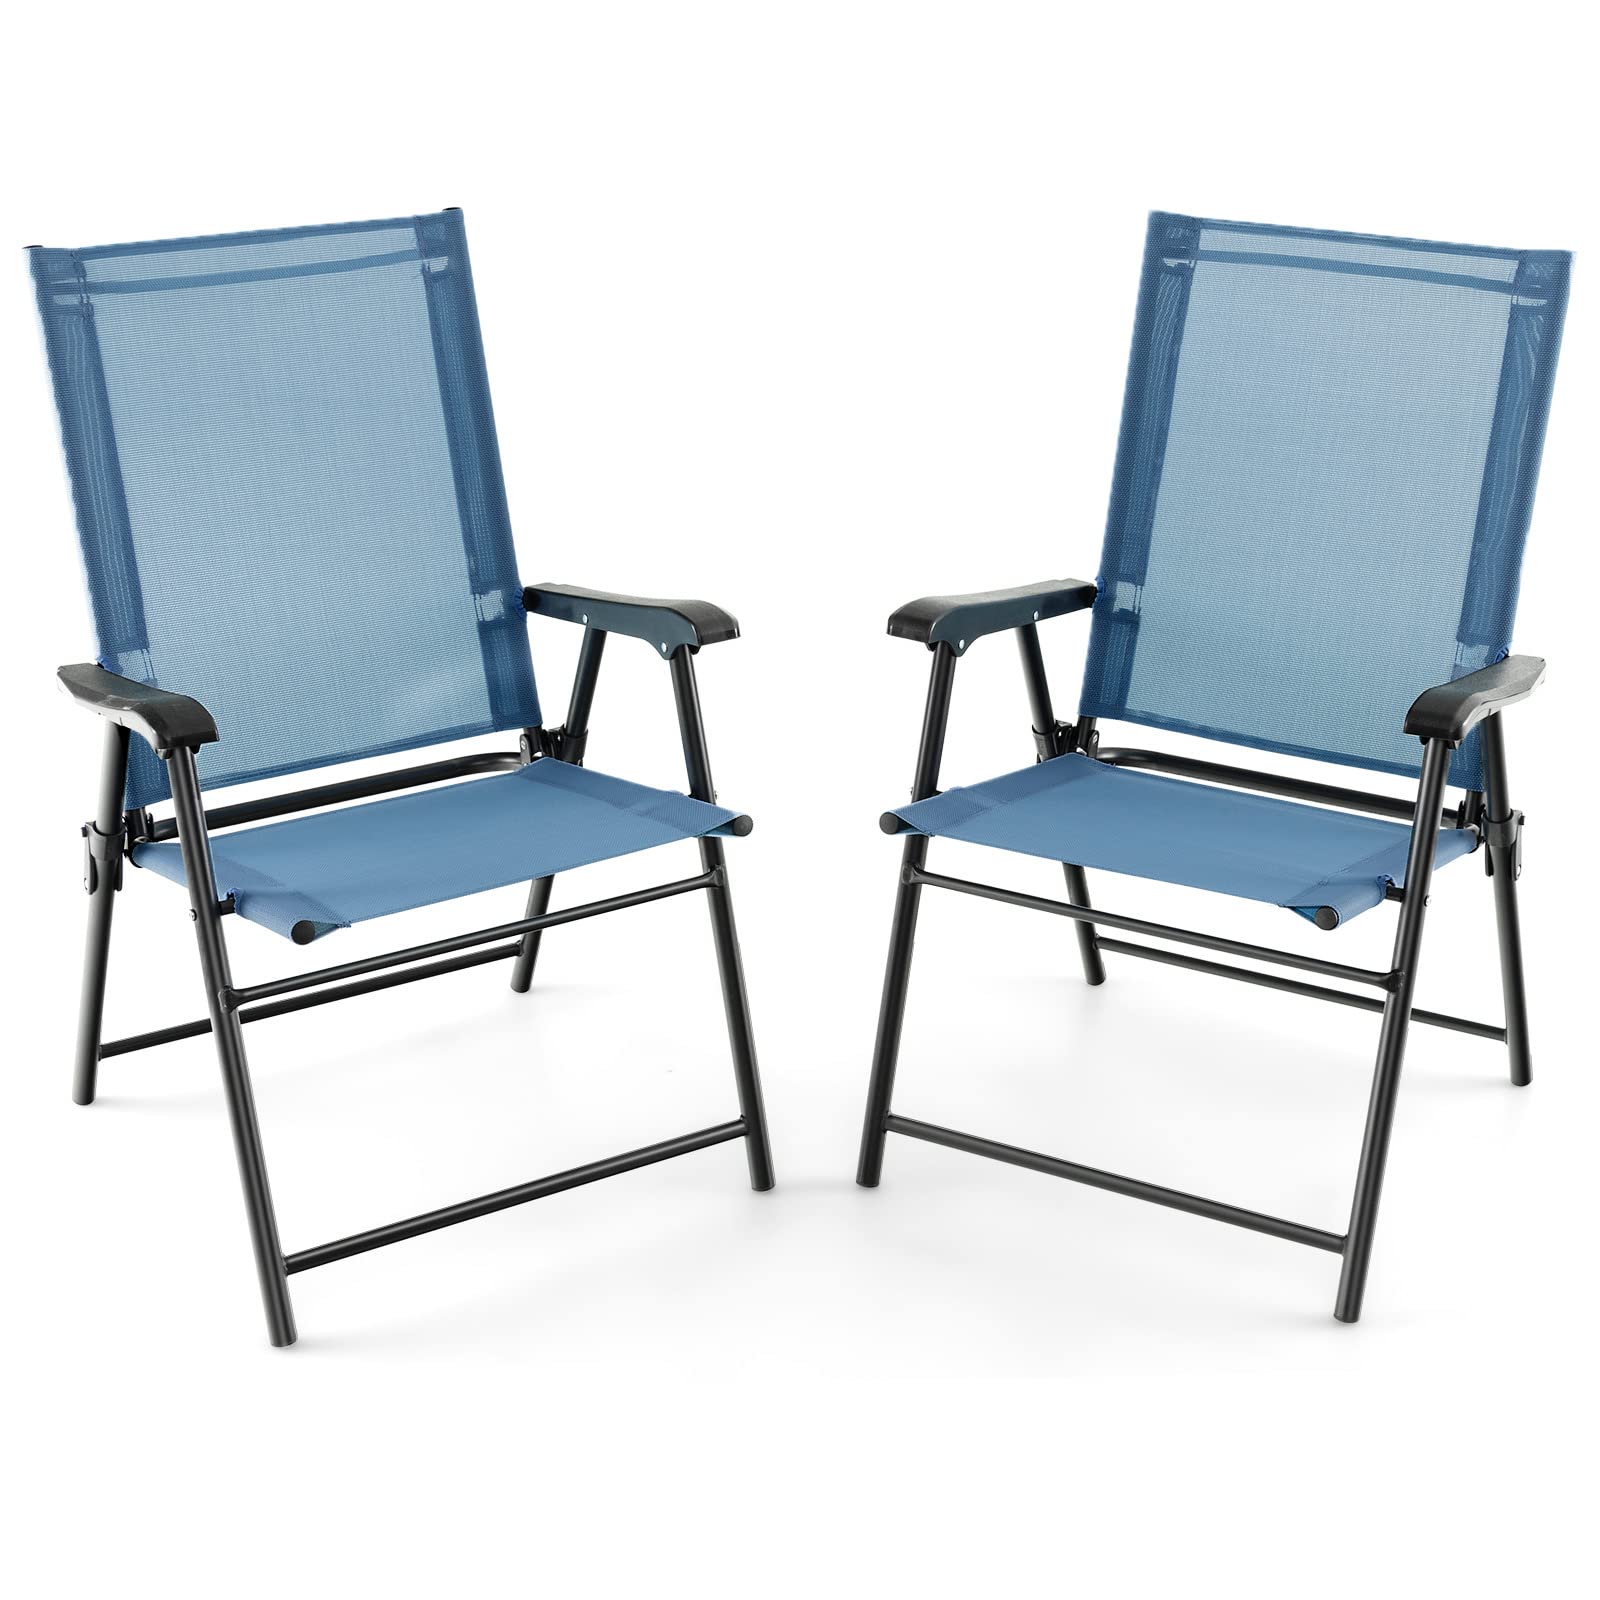 Tangkula Set of 2 Patio Folding Chairs, Portable Sling Back Chairs with Armrests and Metal Frame